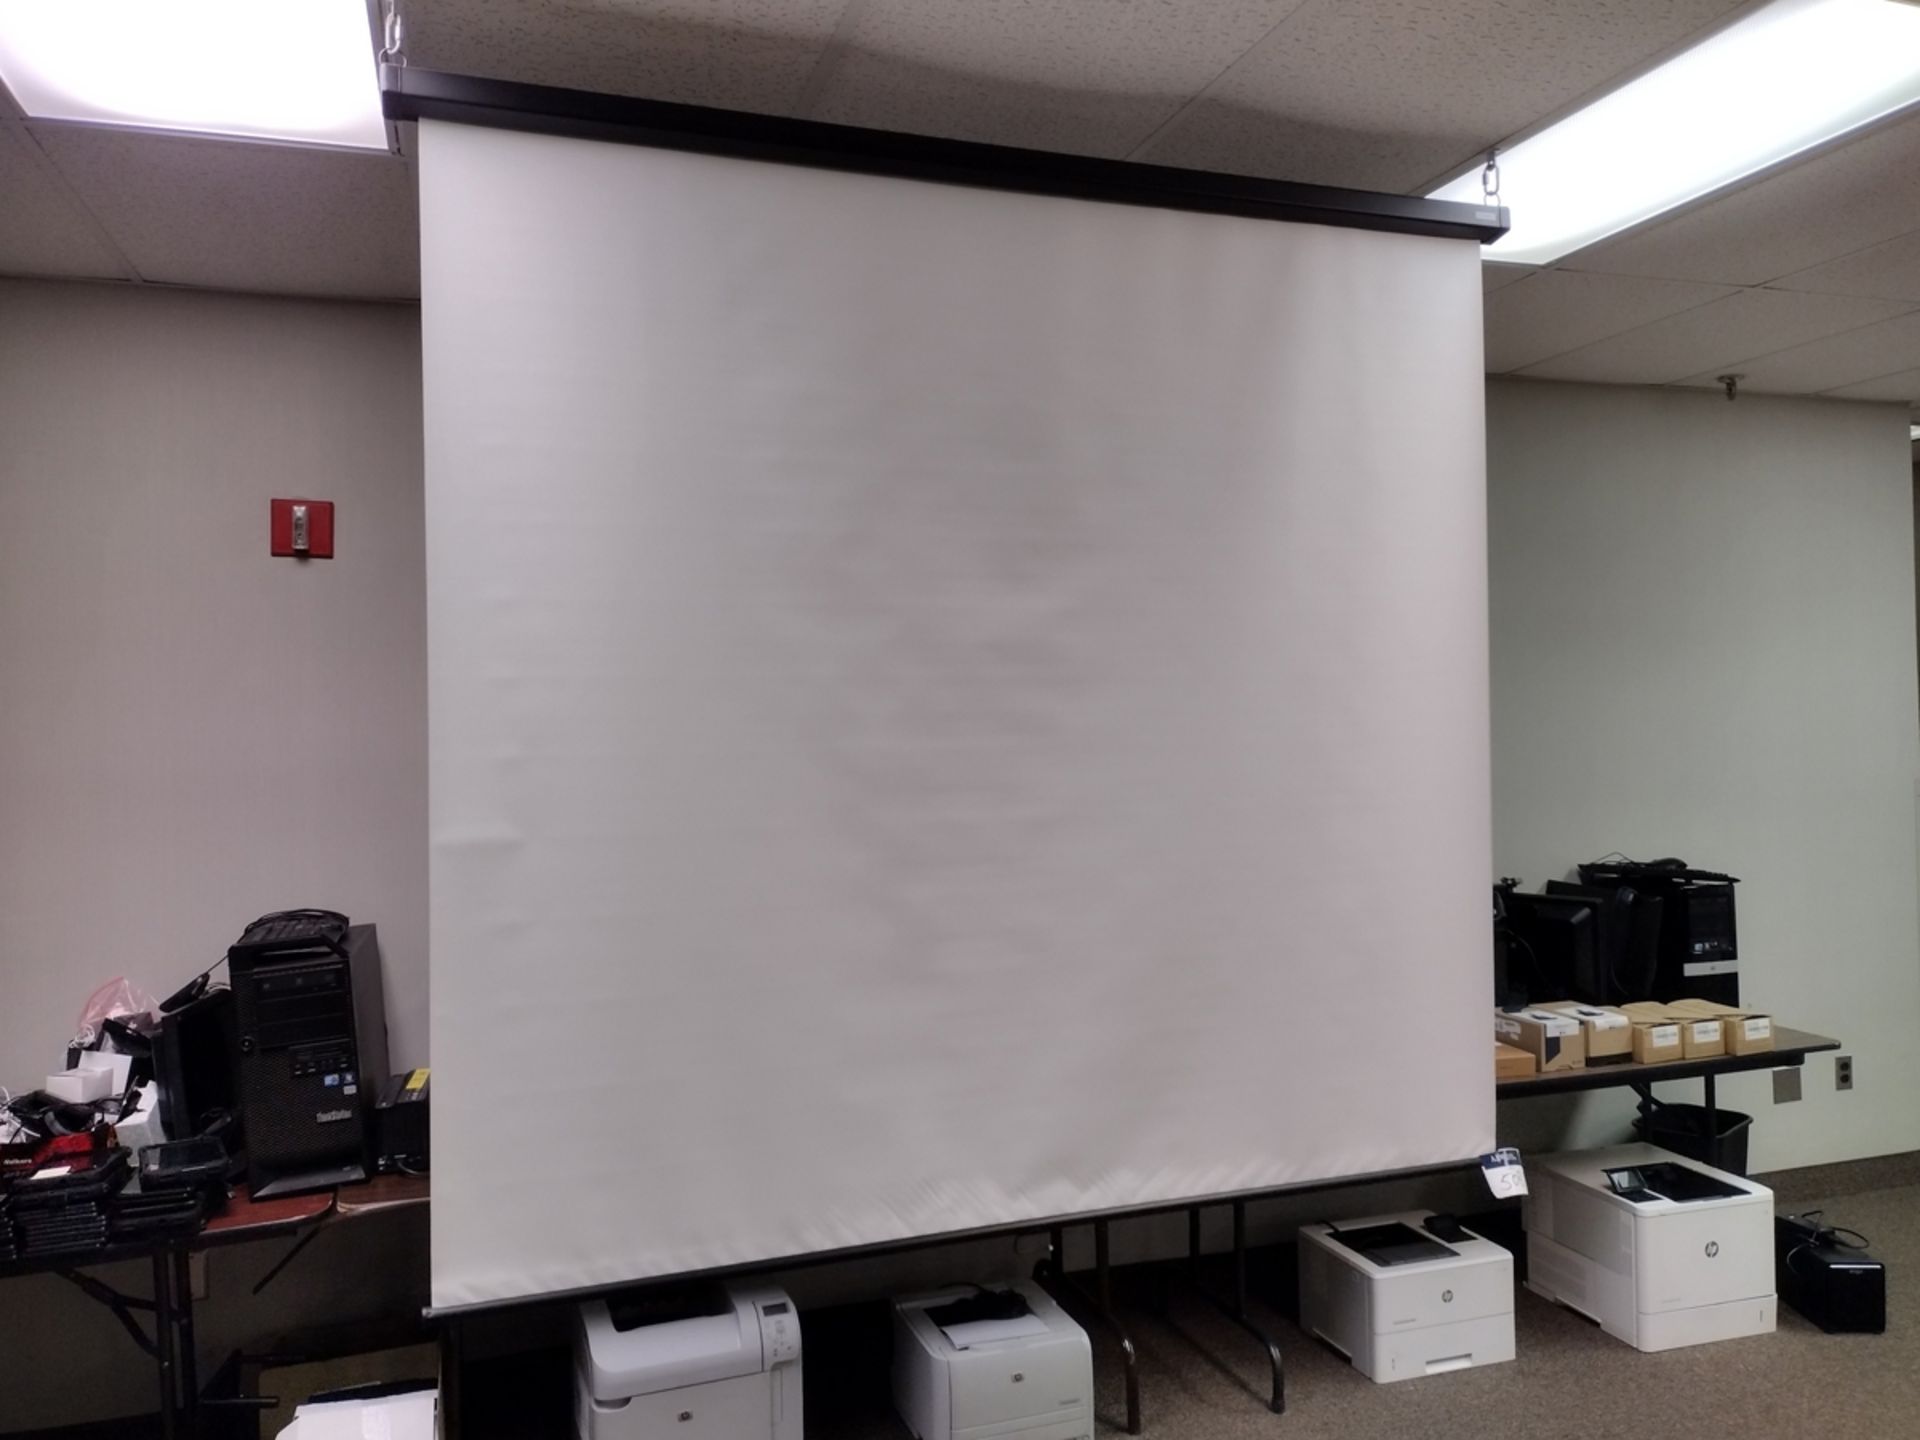 Bretford 94" Pull-Down Projection Screen